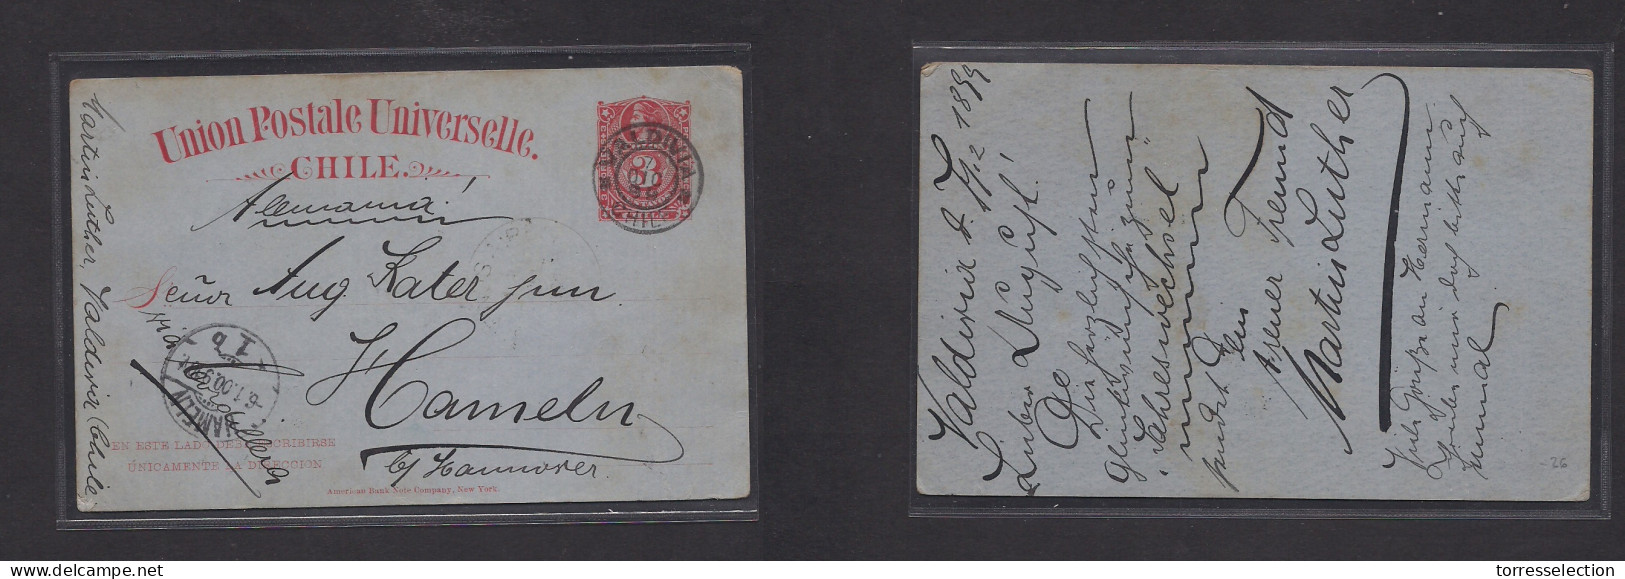 CHILE - Stationery. 1899 (7 Dic) Valdivia - Germany, Hamelin (6 Jan 1900) 3c Red Stat Card. Fine Used. - Chile